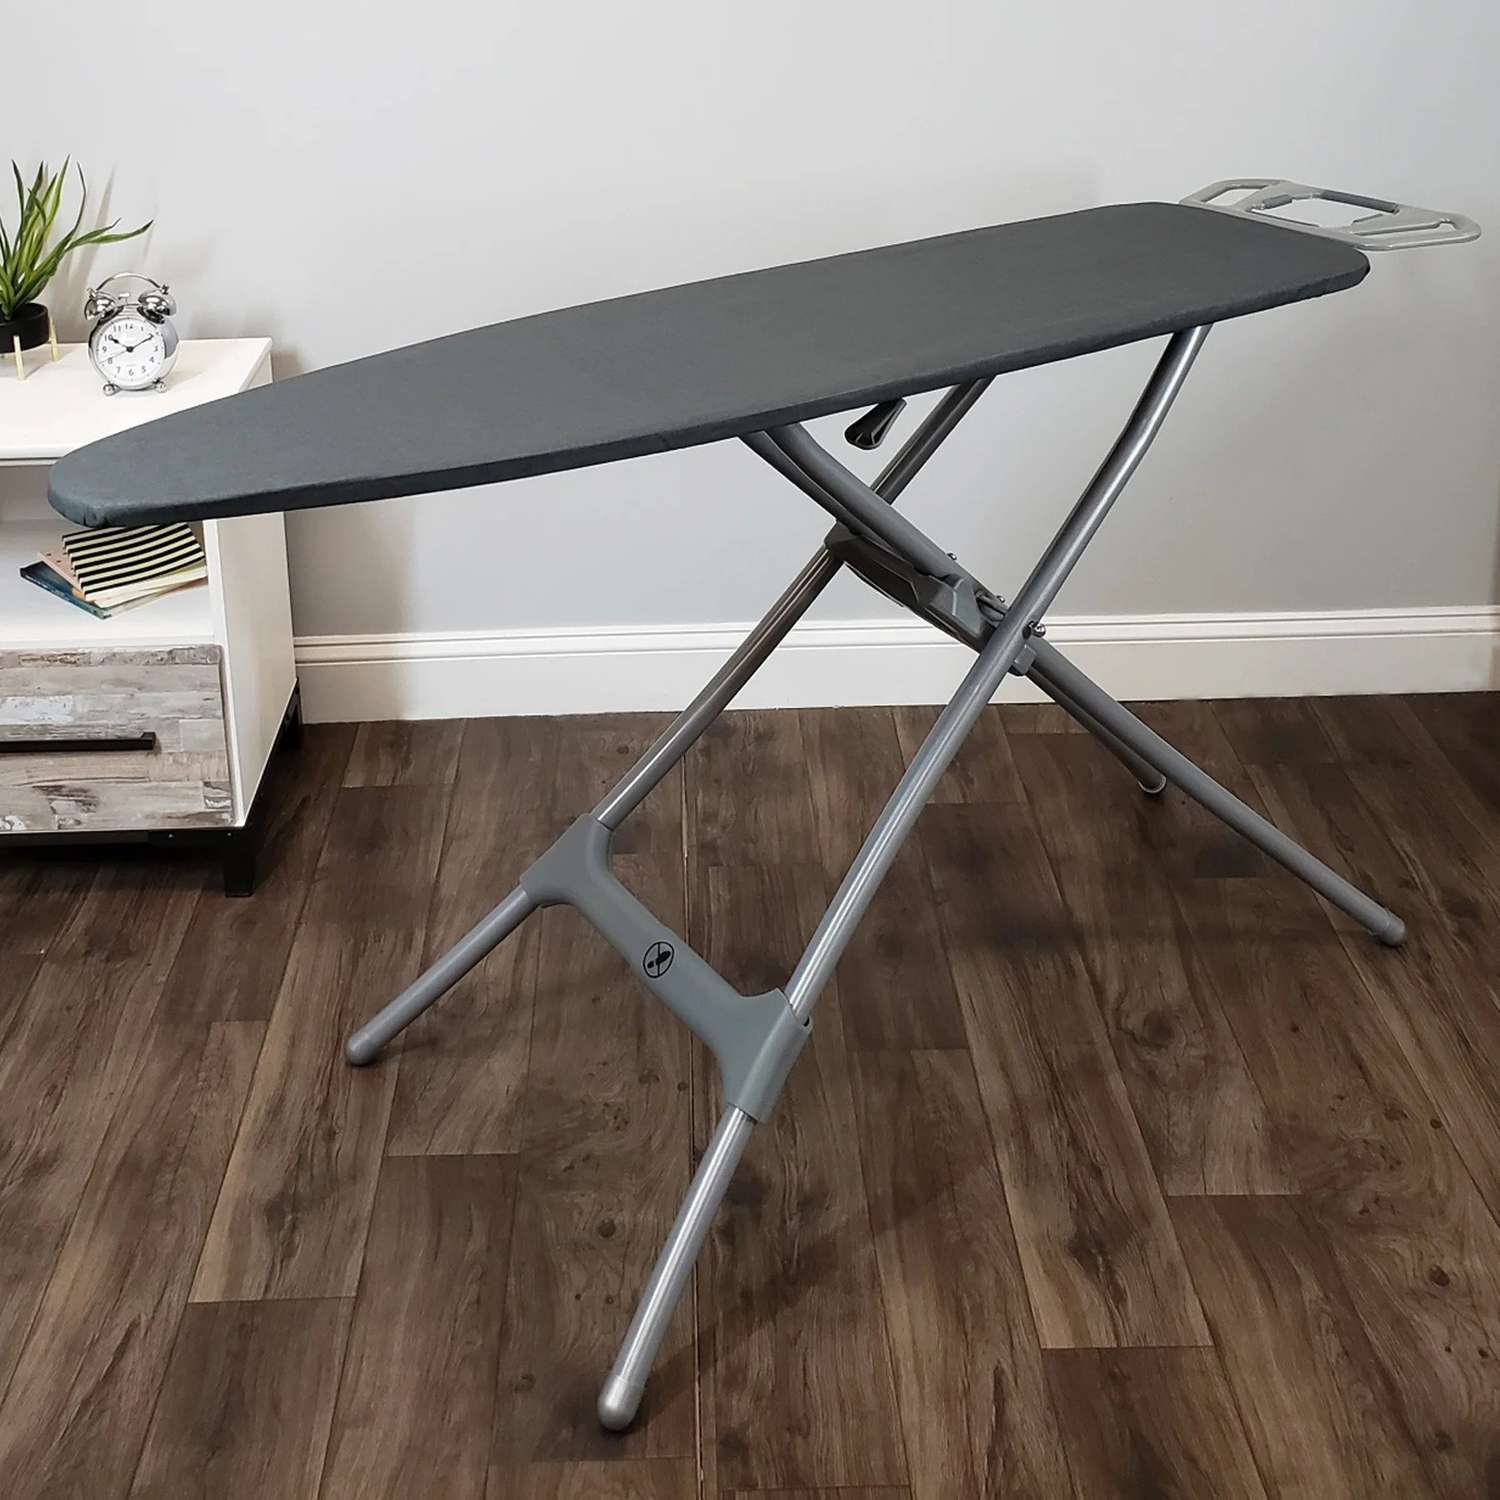 Counter Top Ironing Board Lightweight Table Mat Steel Frame Folding Portable New 